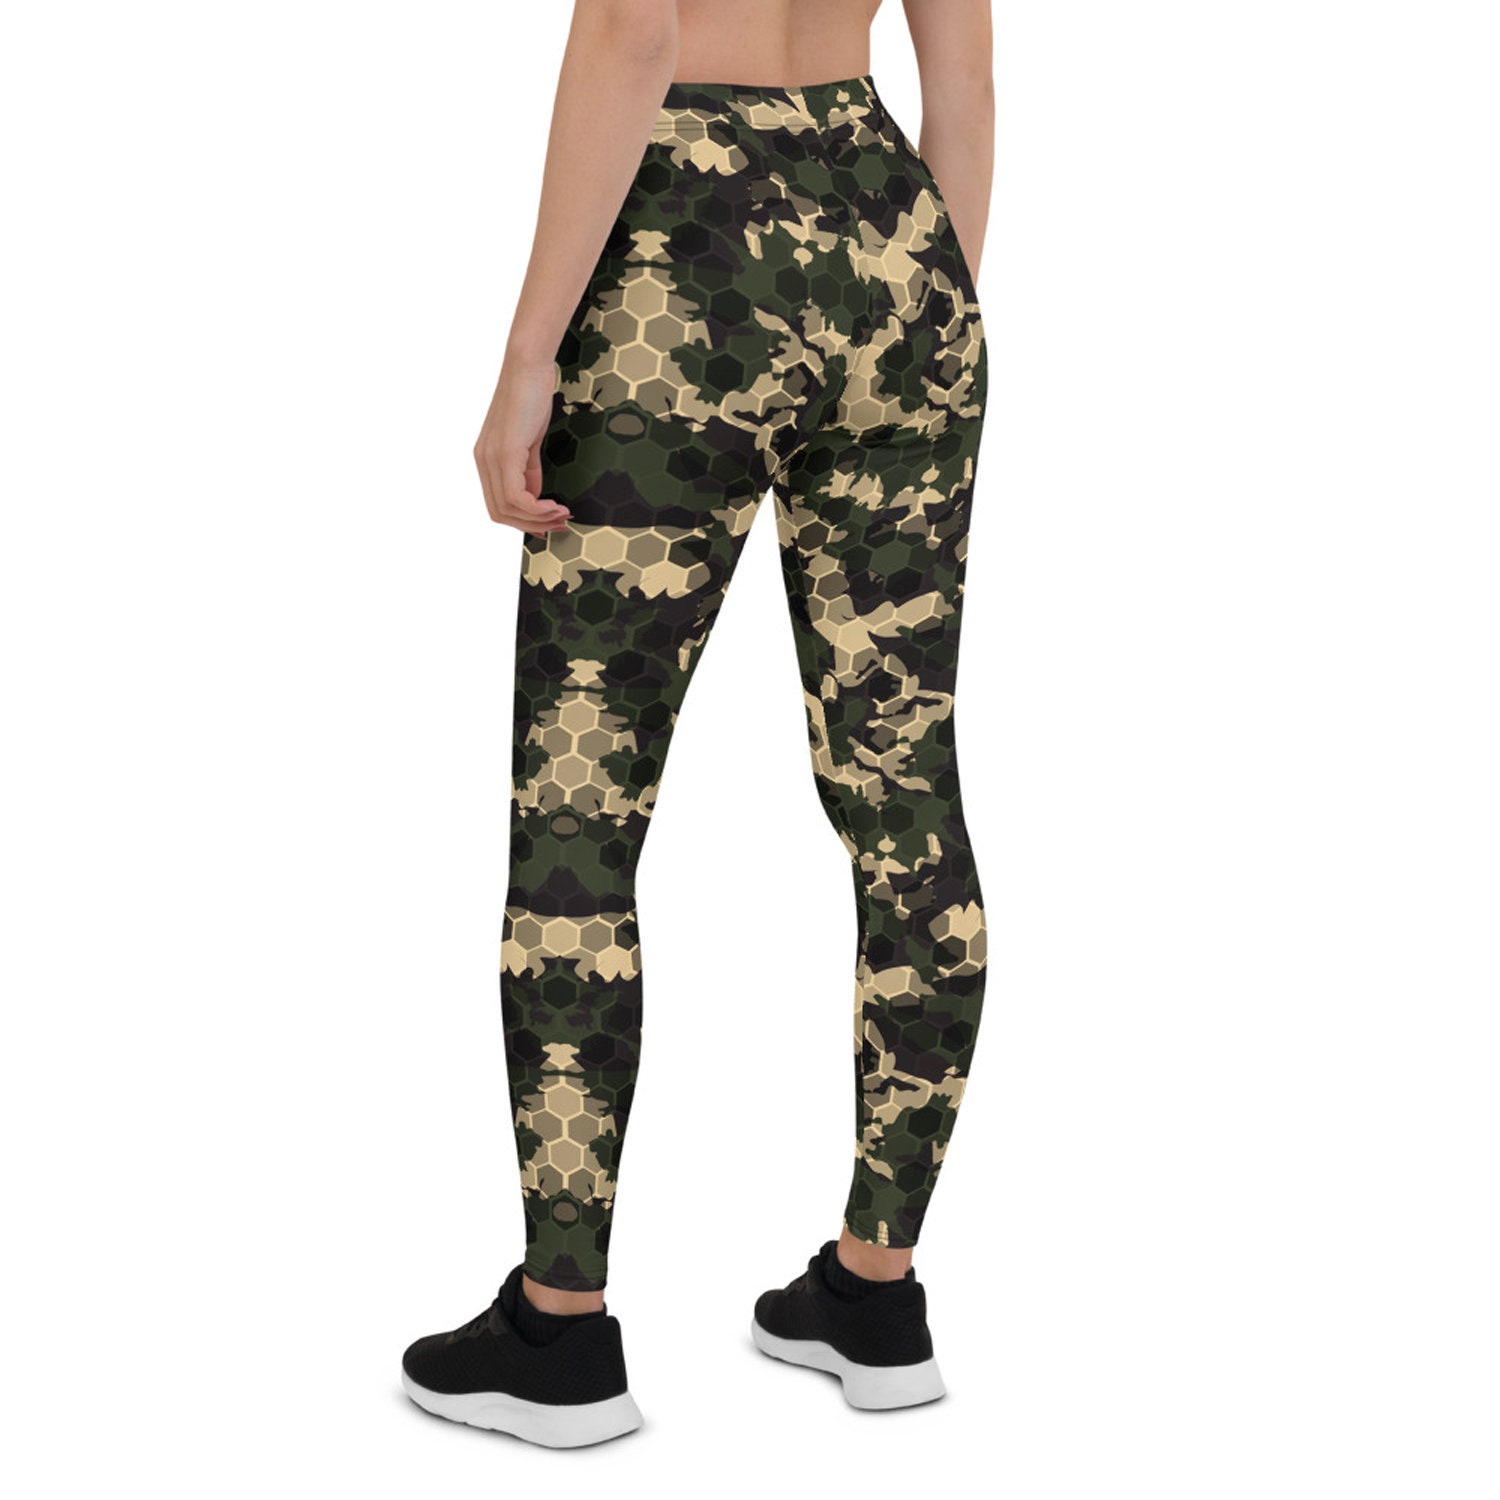 Army Camo Leggings for Women Printed Camouflage Green Leggings W